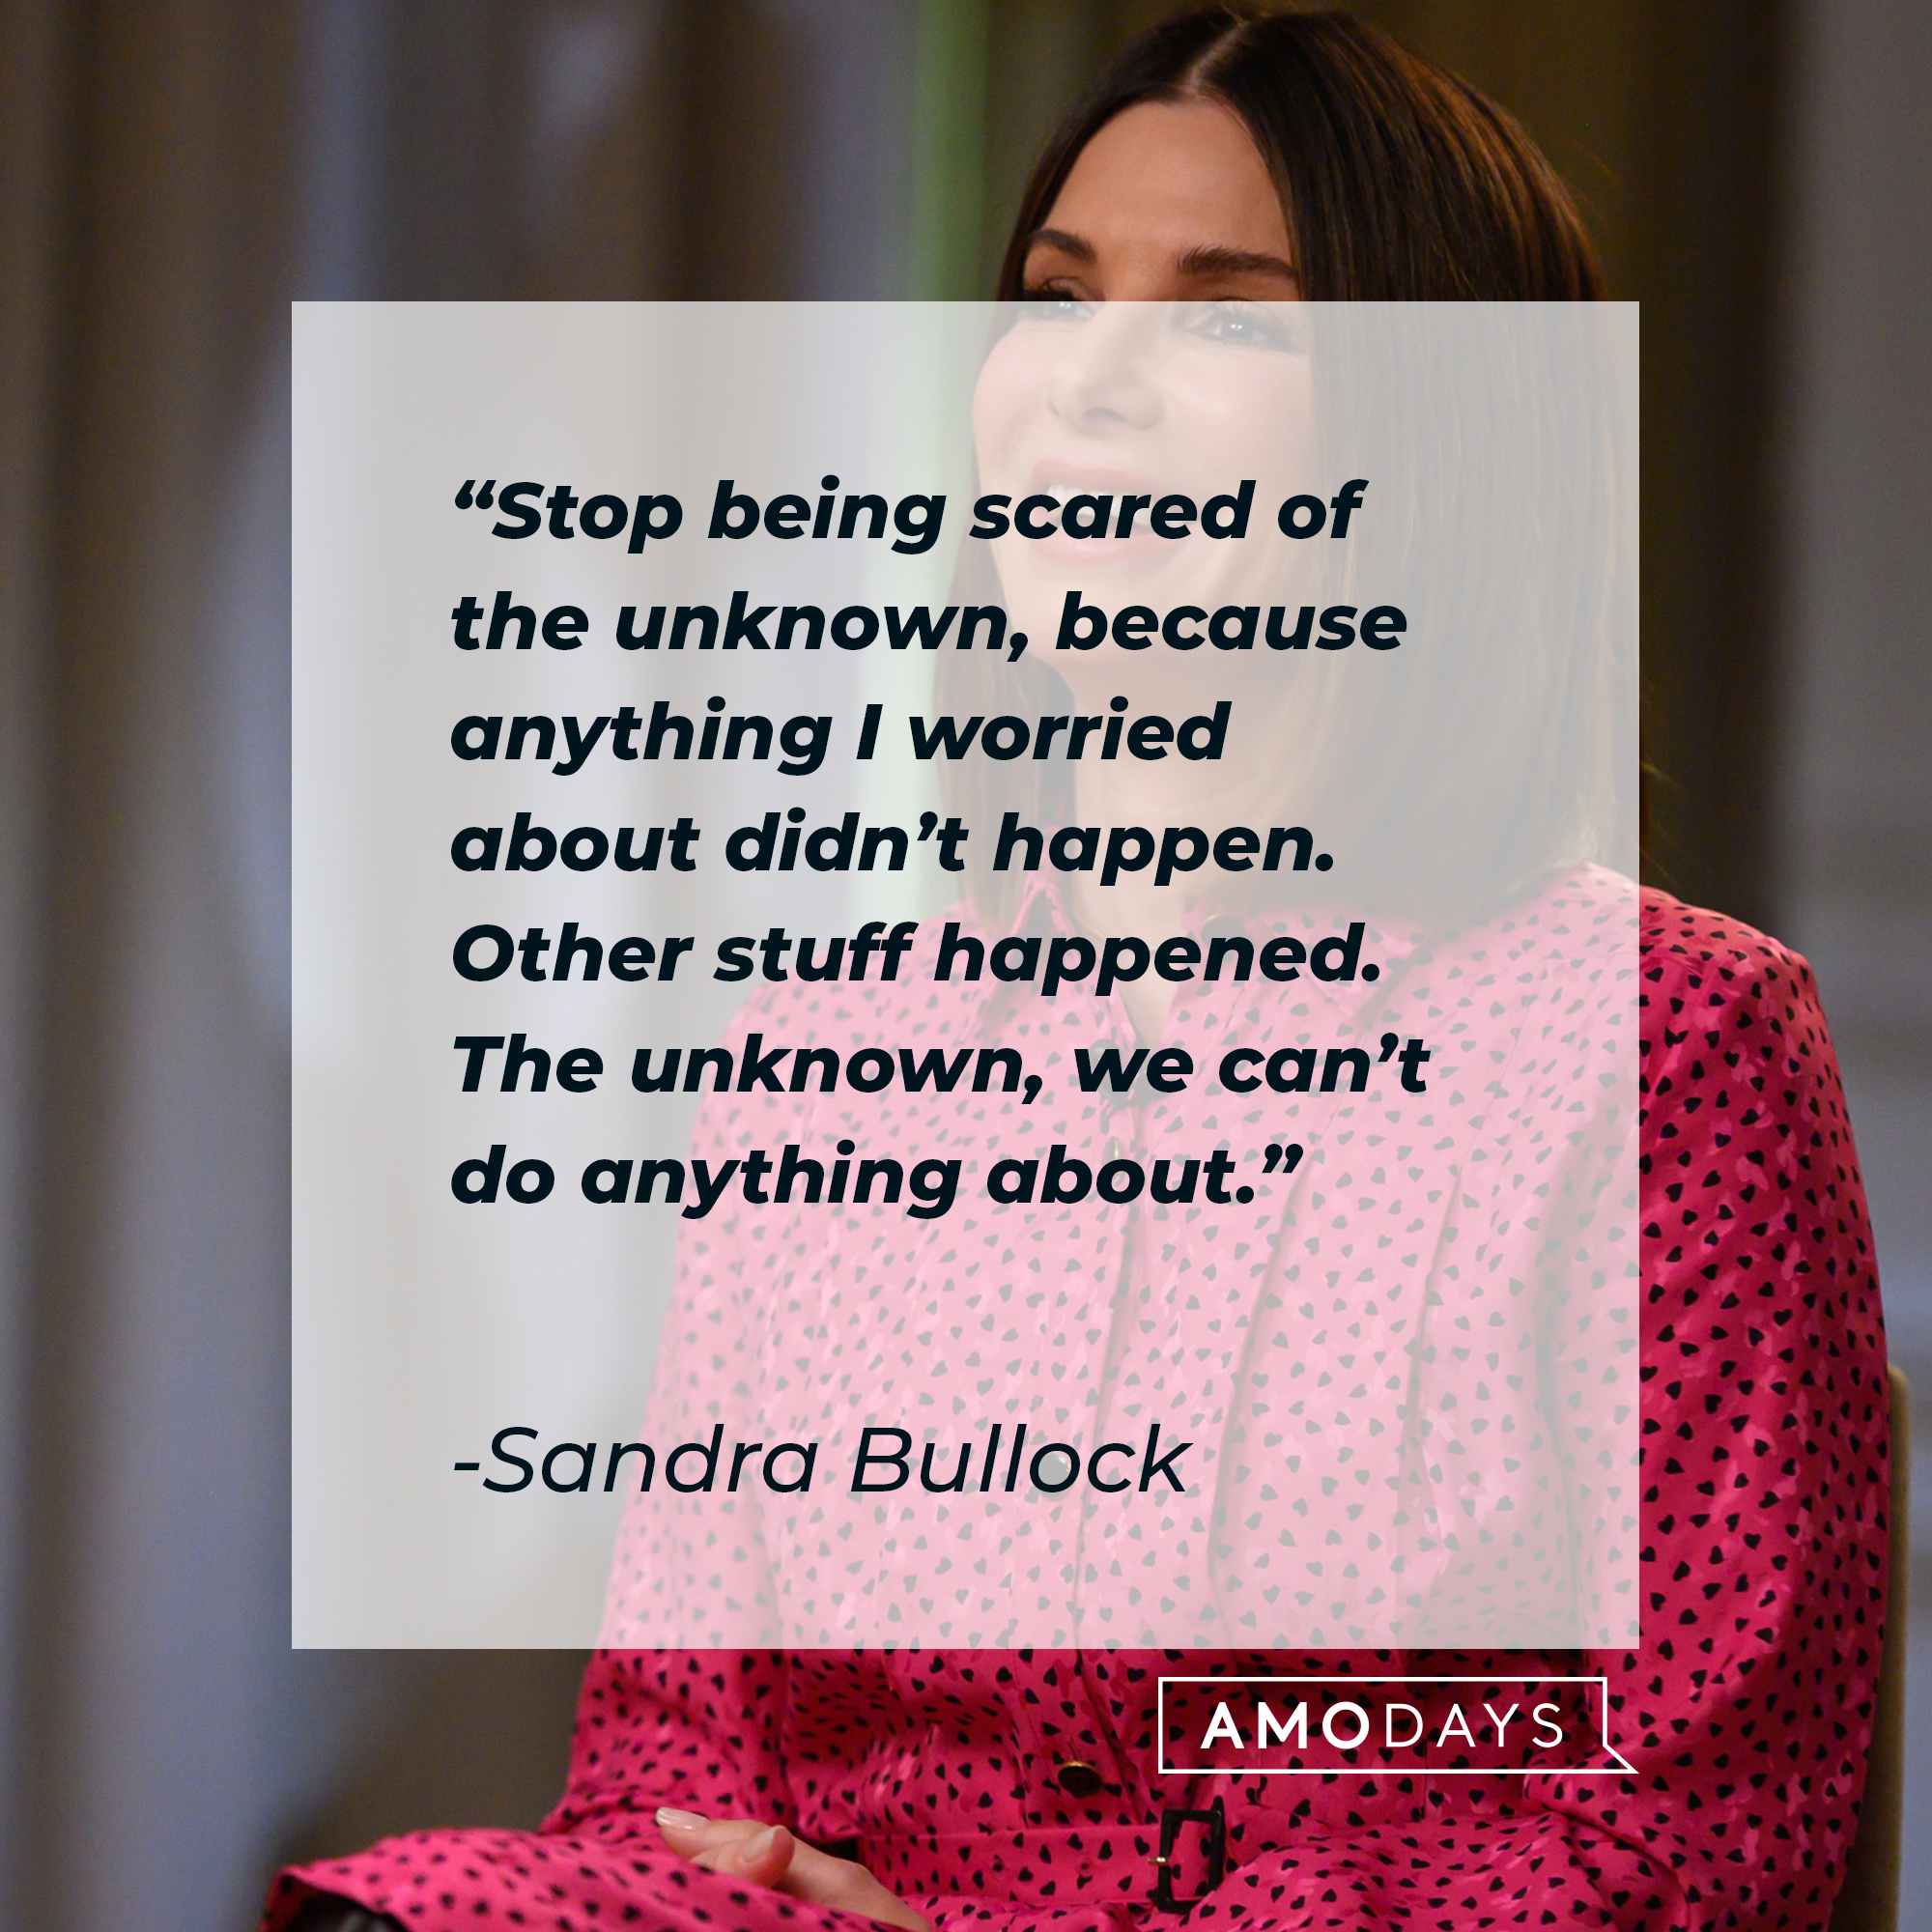 Sandra Bullock's quote: “Stop being scared of the unknown, because anything I worried about didn’t happen. Other stuff happened. The unknown, we can’t do anything about.” | Source: Getty Images